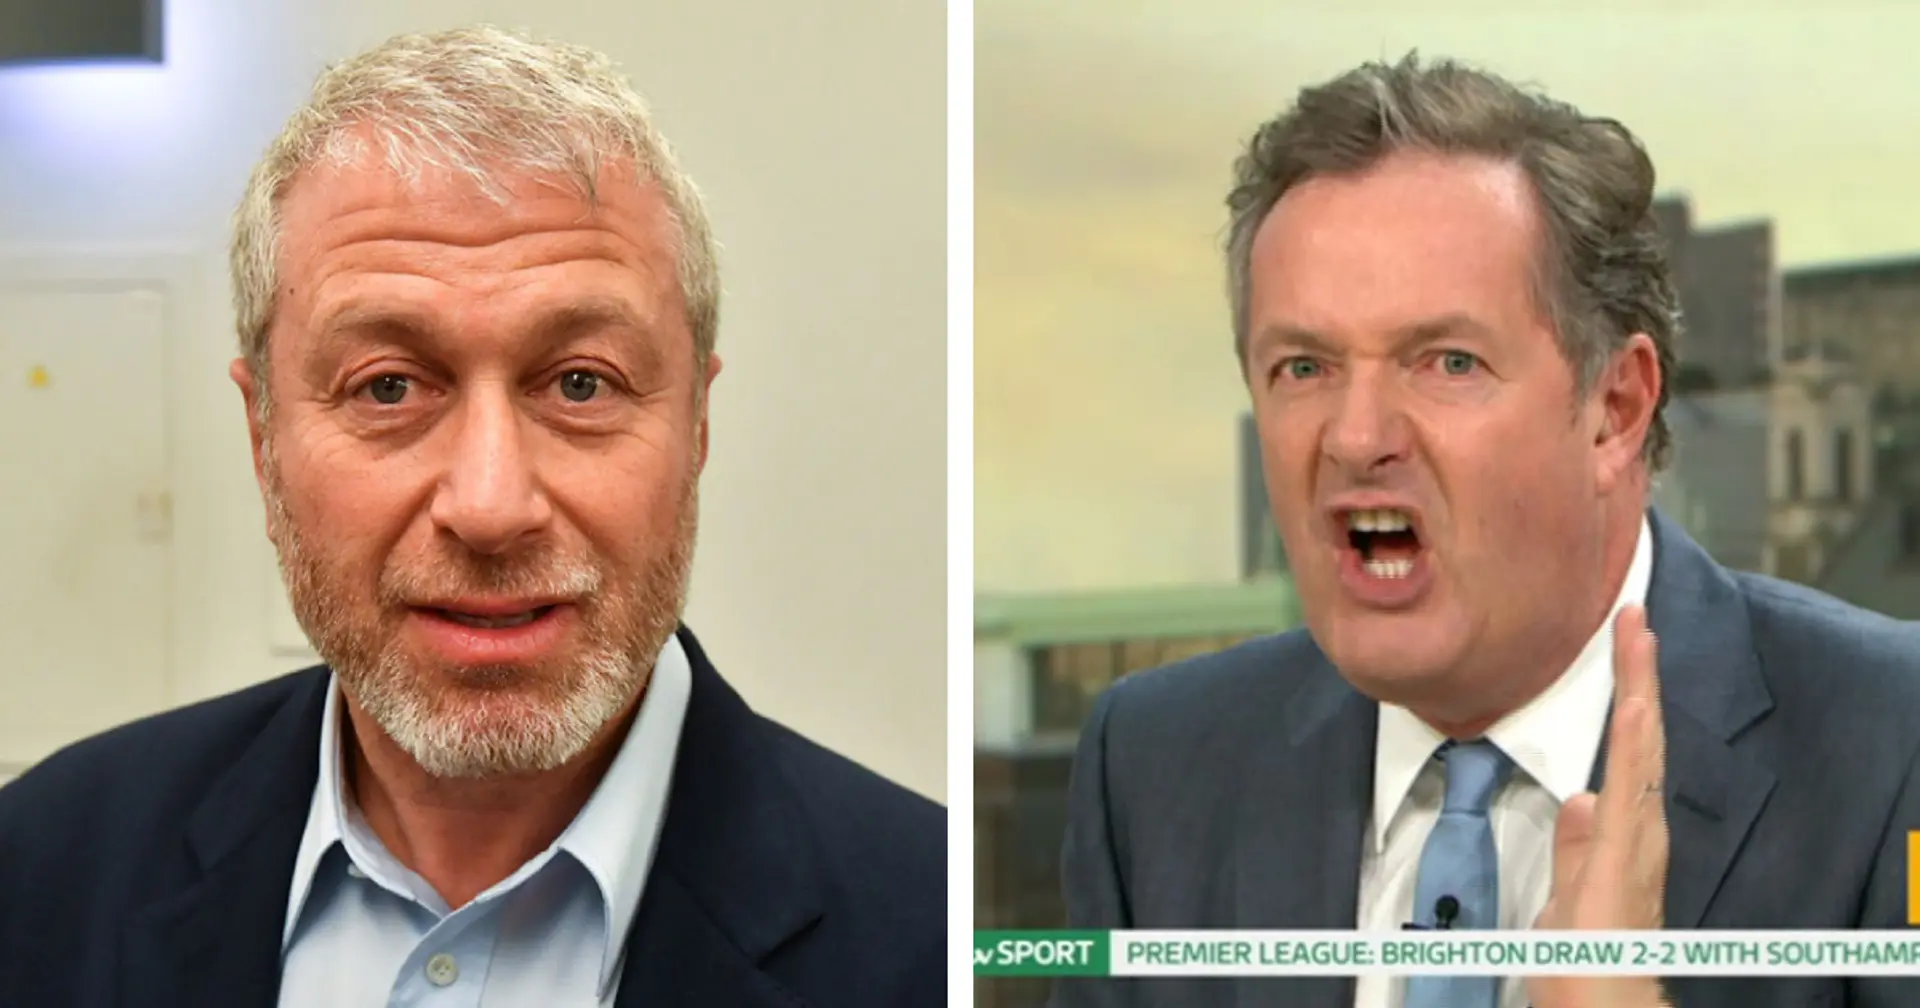 'Not a word of condemnation for his mate Putin': Piers Morgan slams Chelsea owner Roman Abramovich